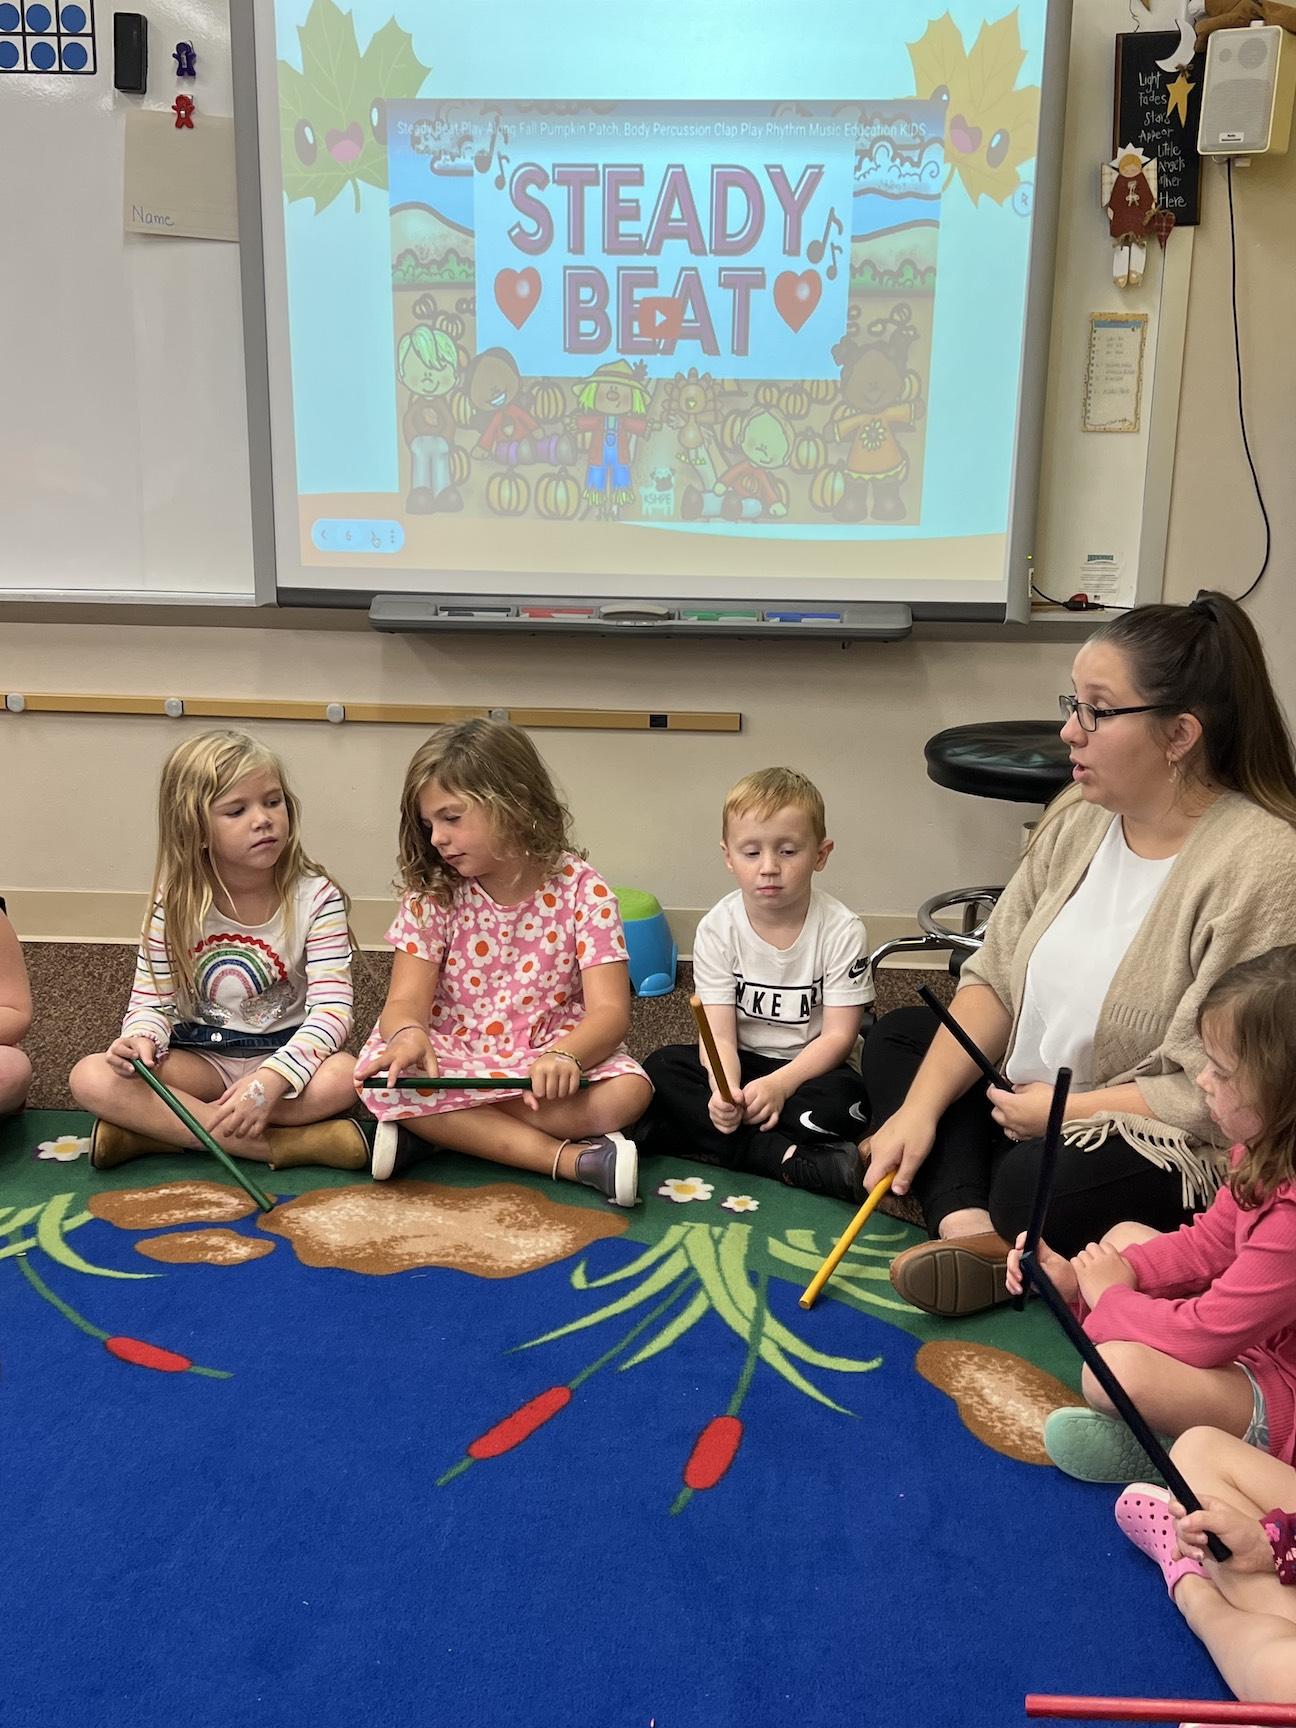 Mrs. Olive leads the music lesson by demonstrating a steady beat with the rhythm sticks